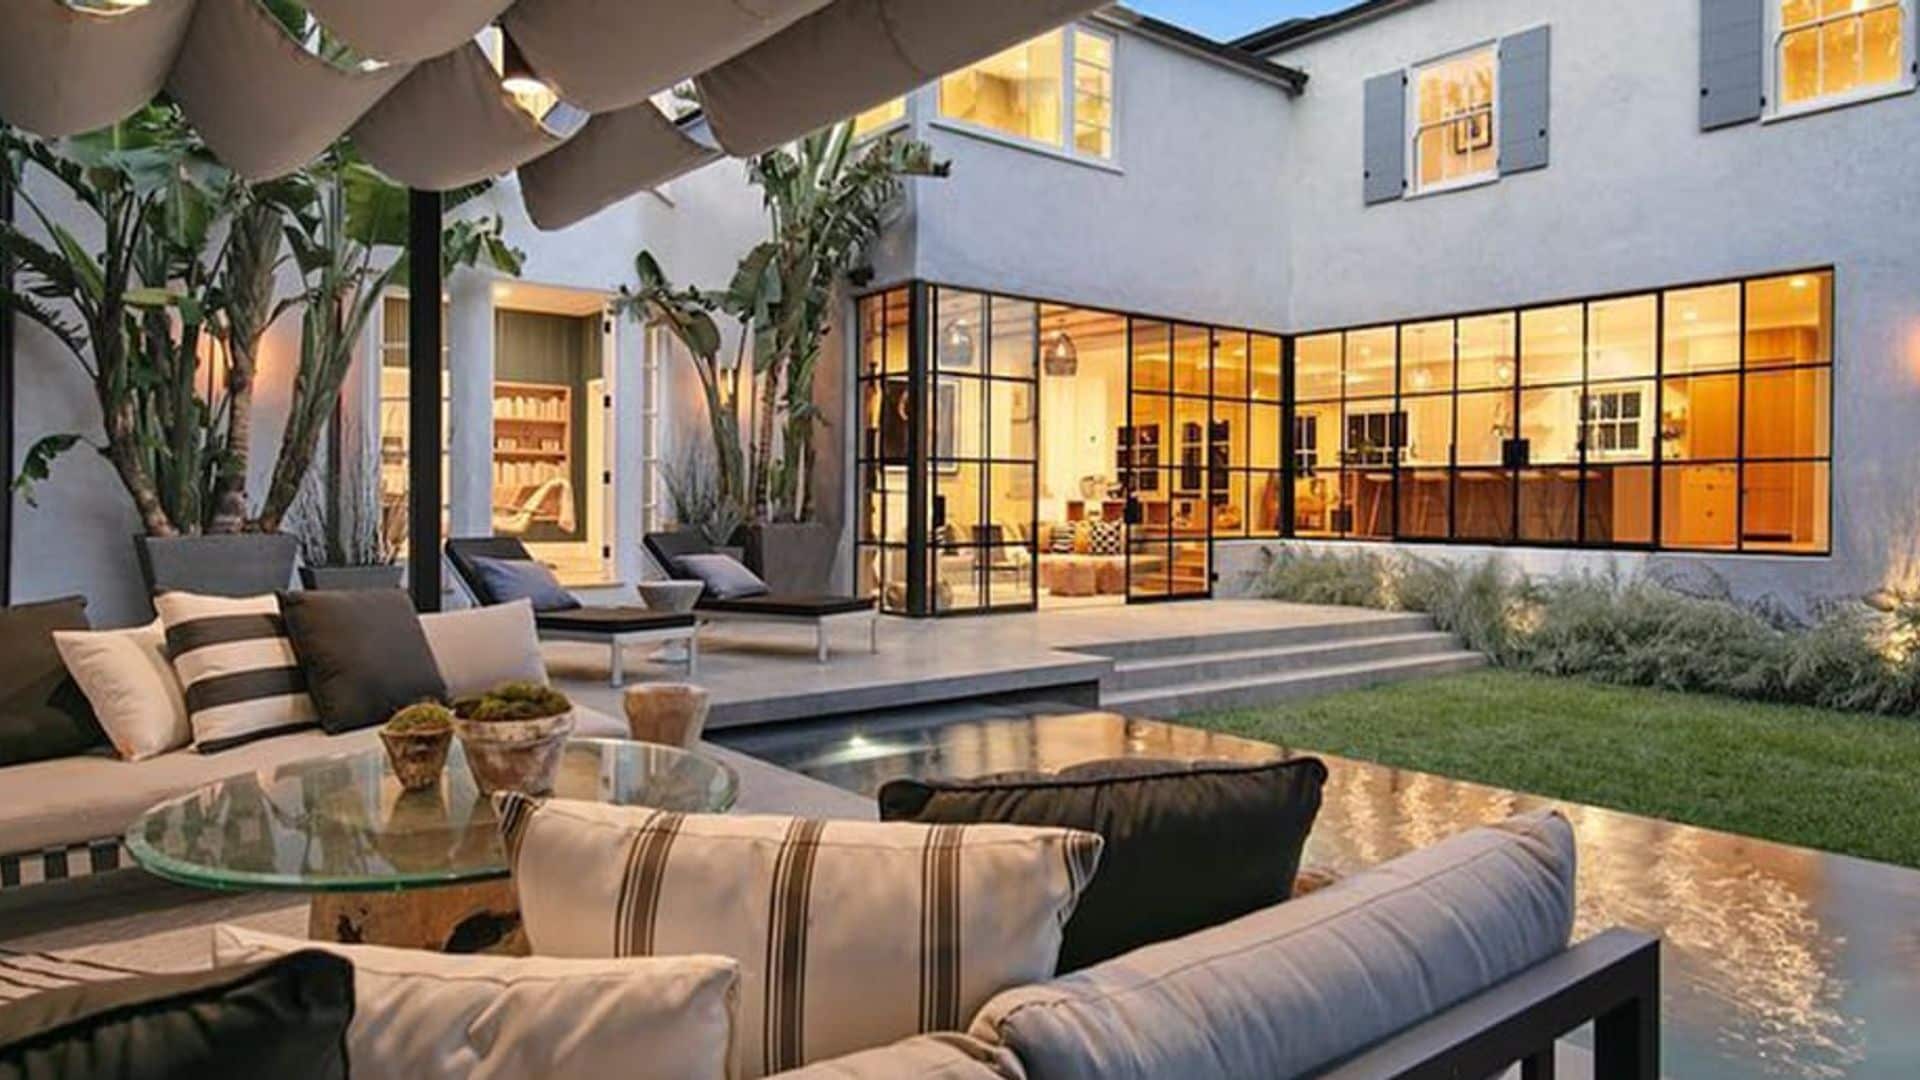 Step into Justin and Hailey Bieber's jaw-dropping $8.5m home